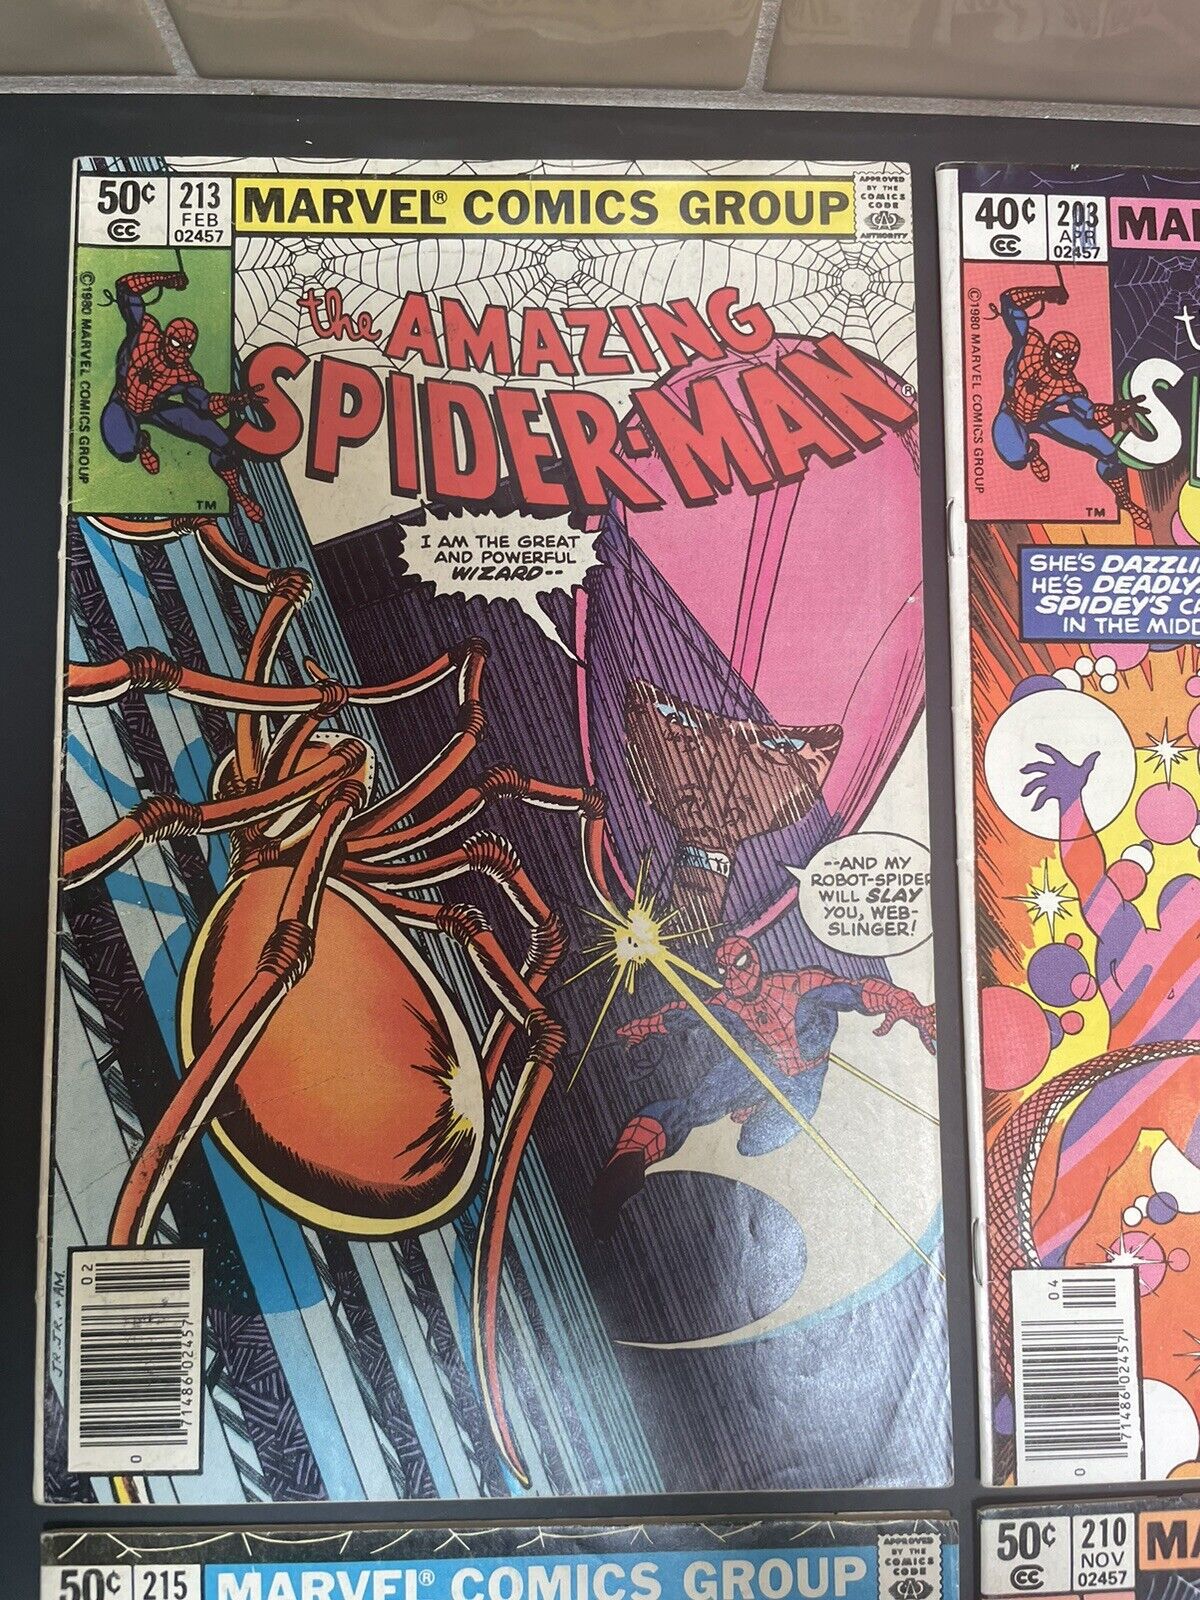 Lot Of 4 Amazing Spider-Man Bronze Age Comic Books. 5.0 To 6.0. All Are Newstand